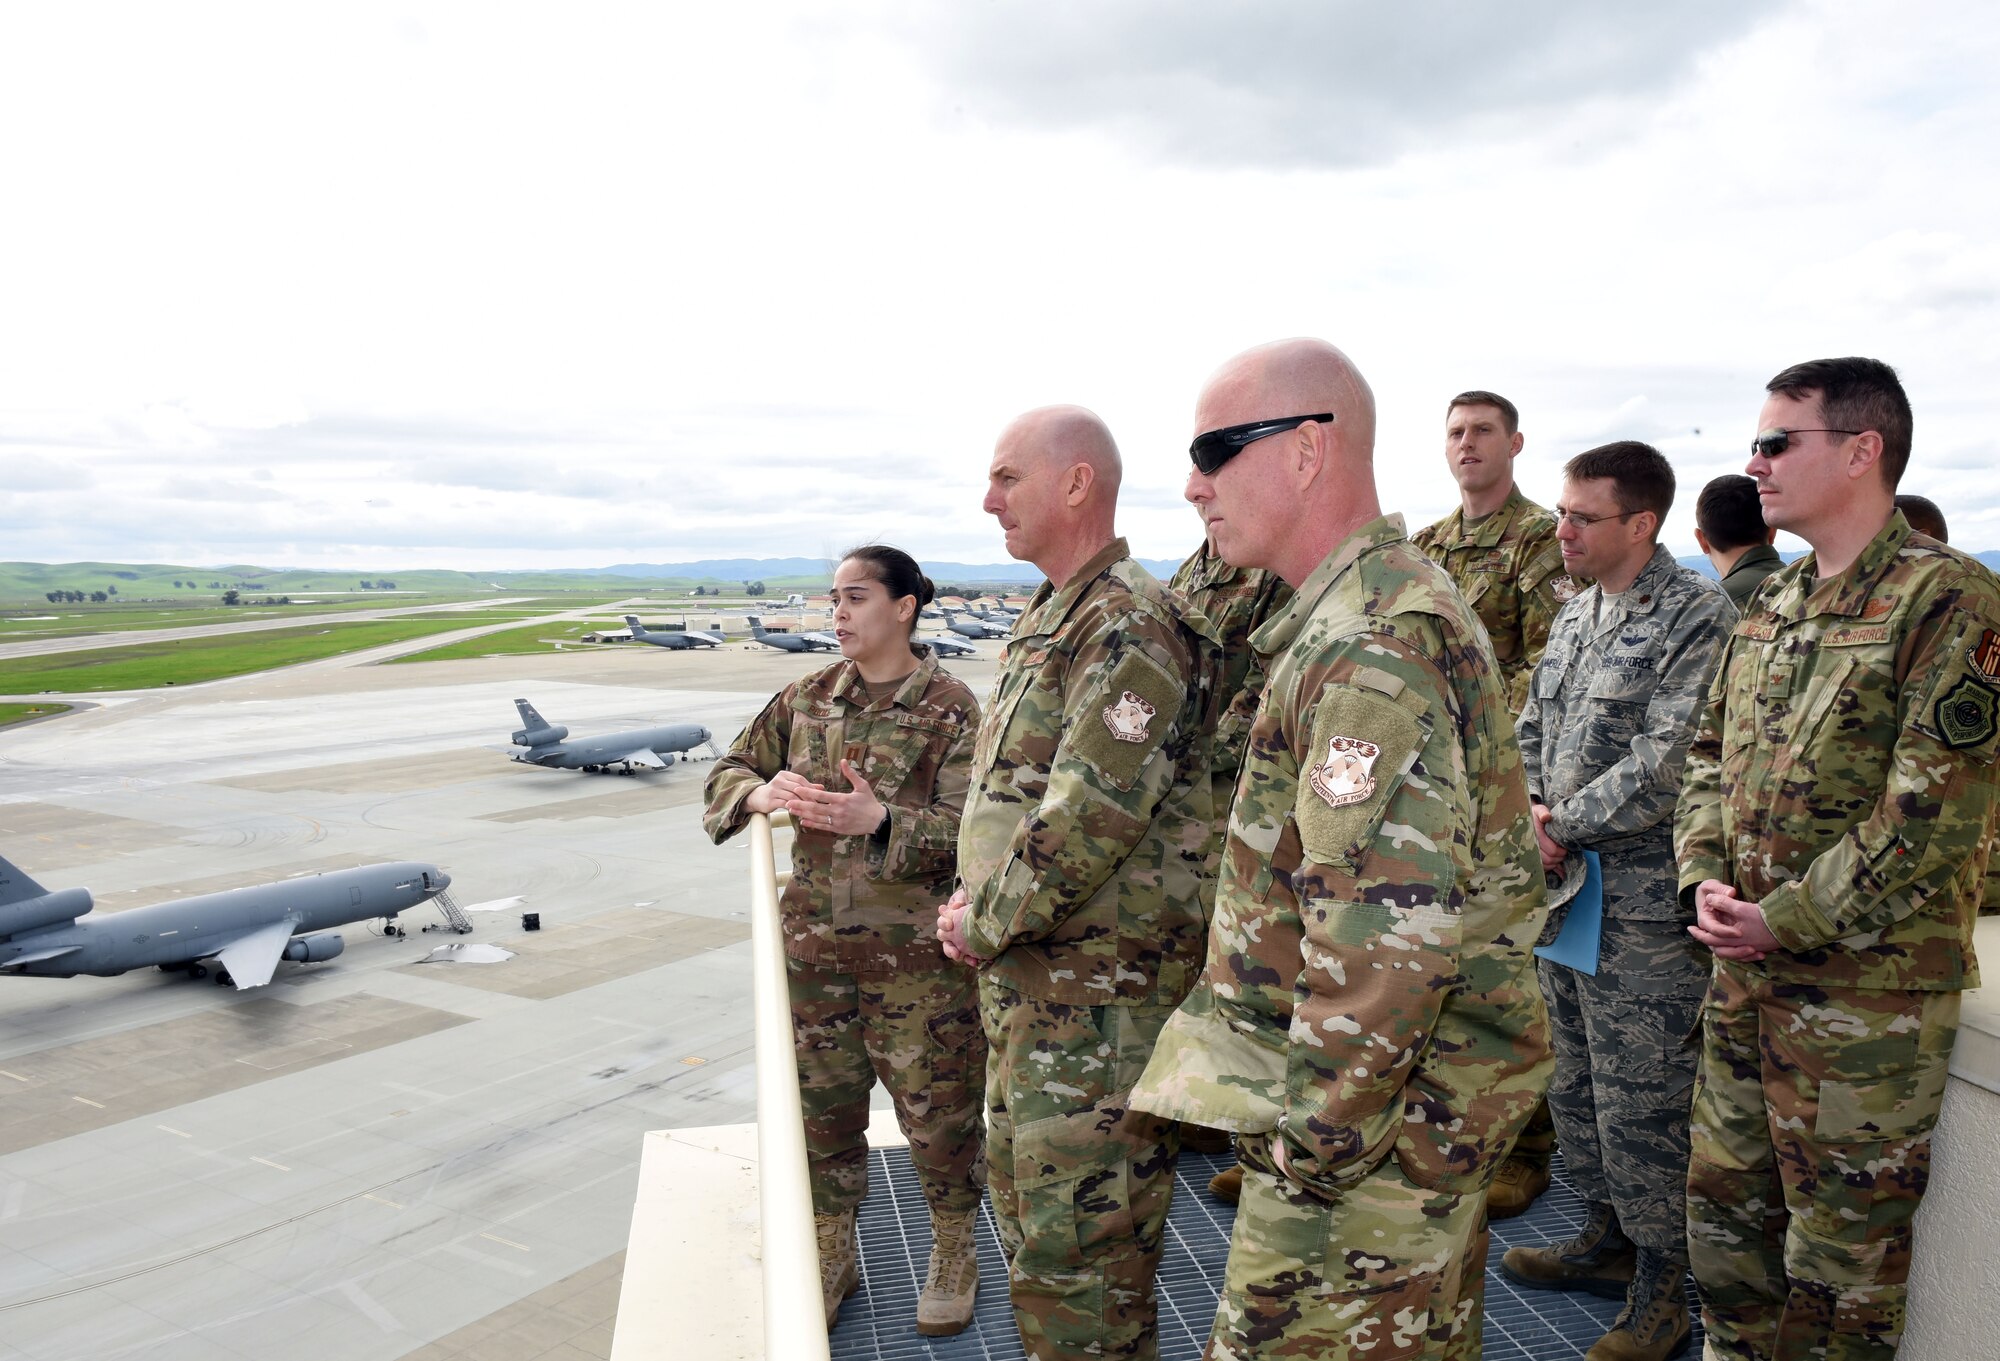 U.S. Air Force Maj. Gen. Sam Barrett, 18th Air Force commander, and U.S. Air Force Chief Master Sgt. Chris Simpson, 18th Air Force command chief, tour the air traffic control tower at Travis Air Force Base, California, March 7, 2019. Barrett and Simpson toured the base March 4 to 8 as part of a scheduled visit. (U.S. Air Force photo by Airman 1st Class Christian Conrad)